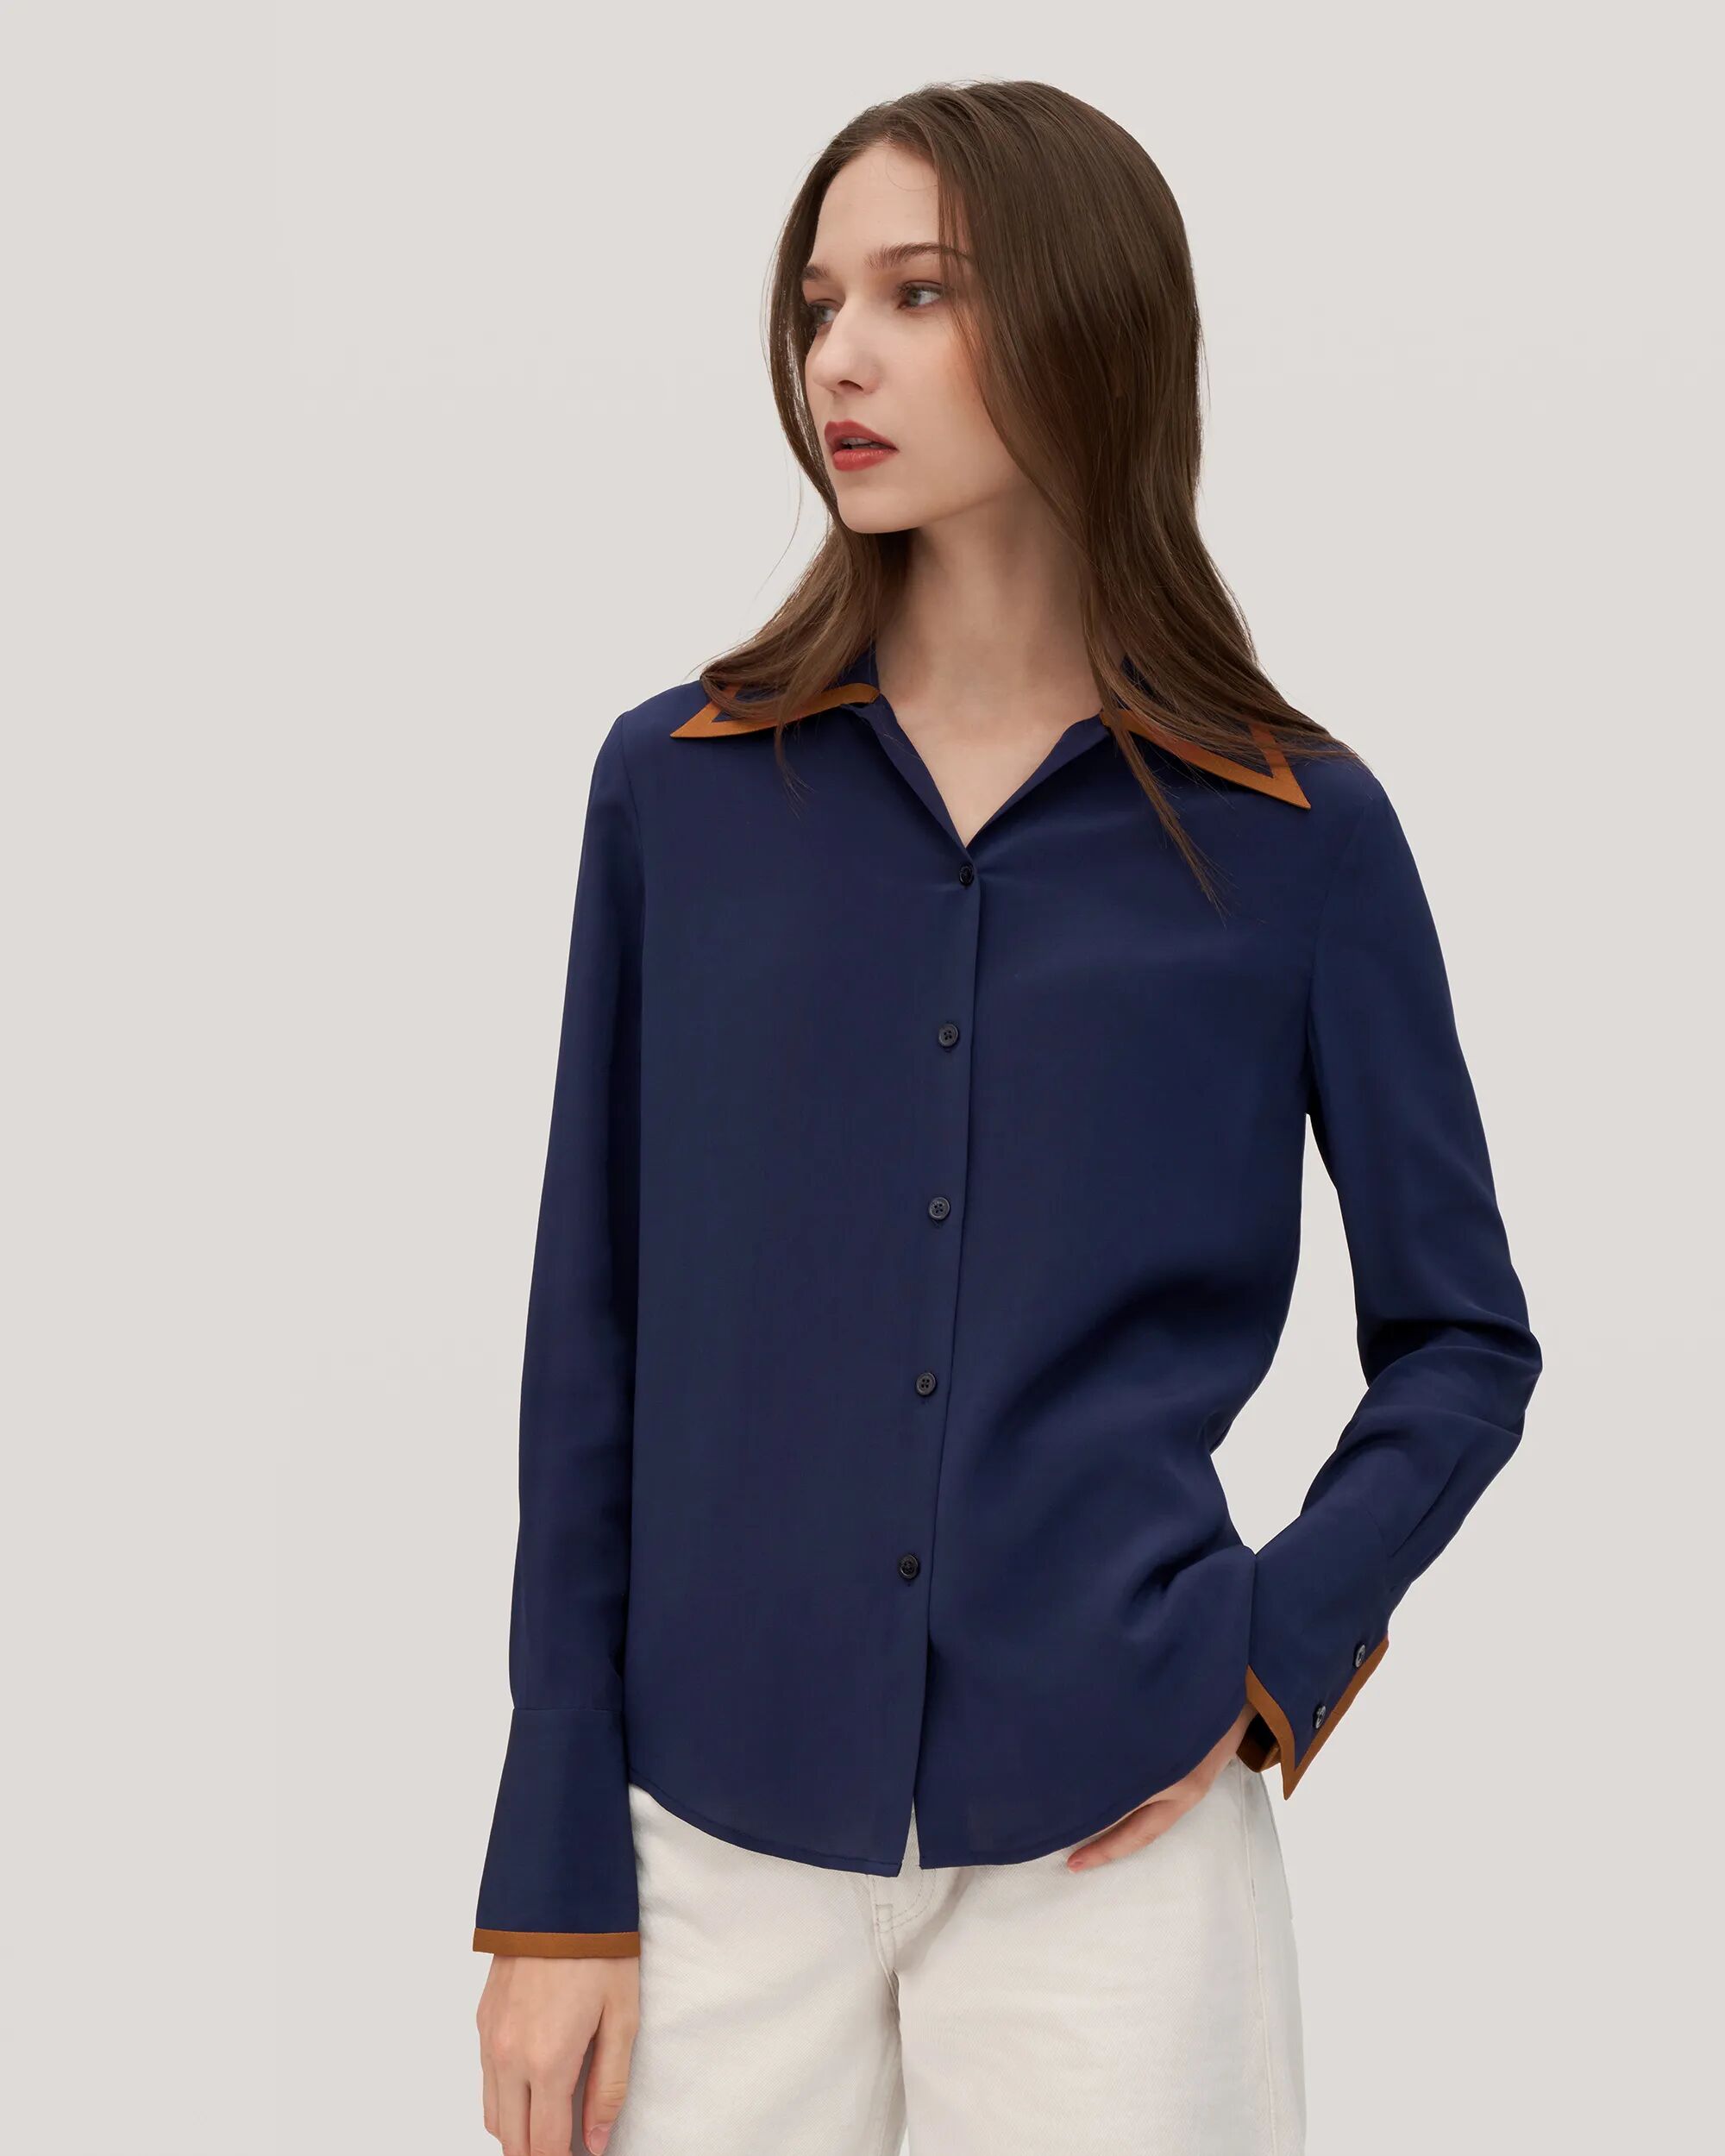 LILYSILK Business Blue Shirt With Brown Collar And Sleeves   Silk Long Style   New Arrivals Contrast Piping Willow Navy Durable Regular Fit